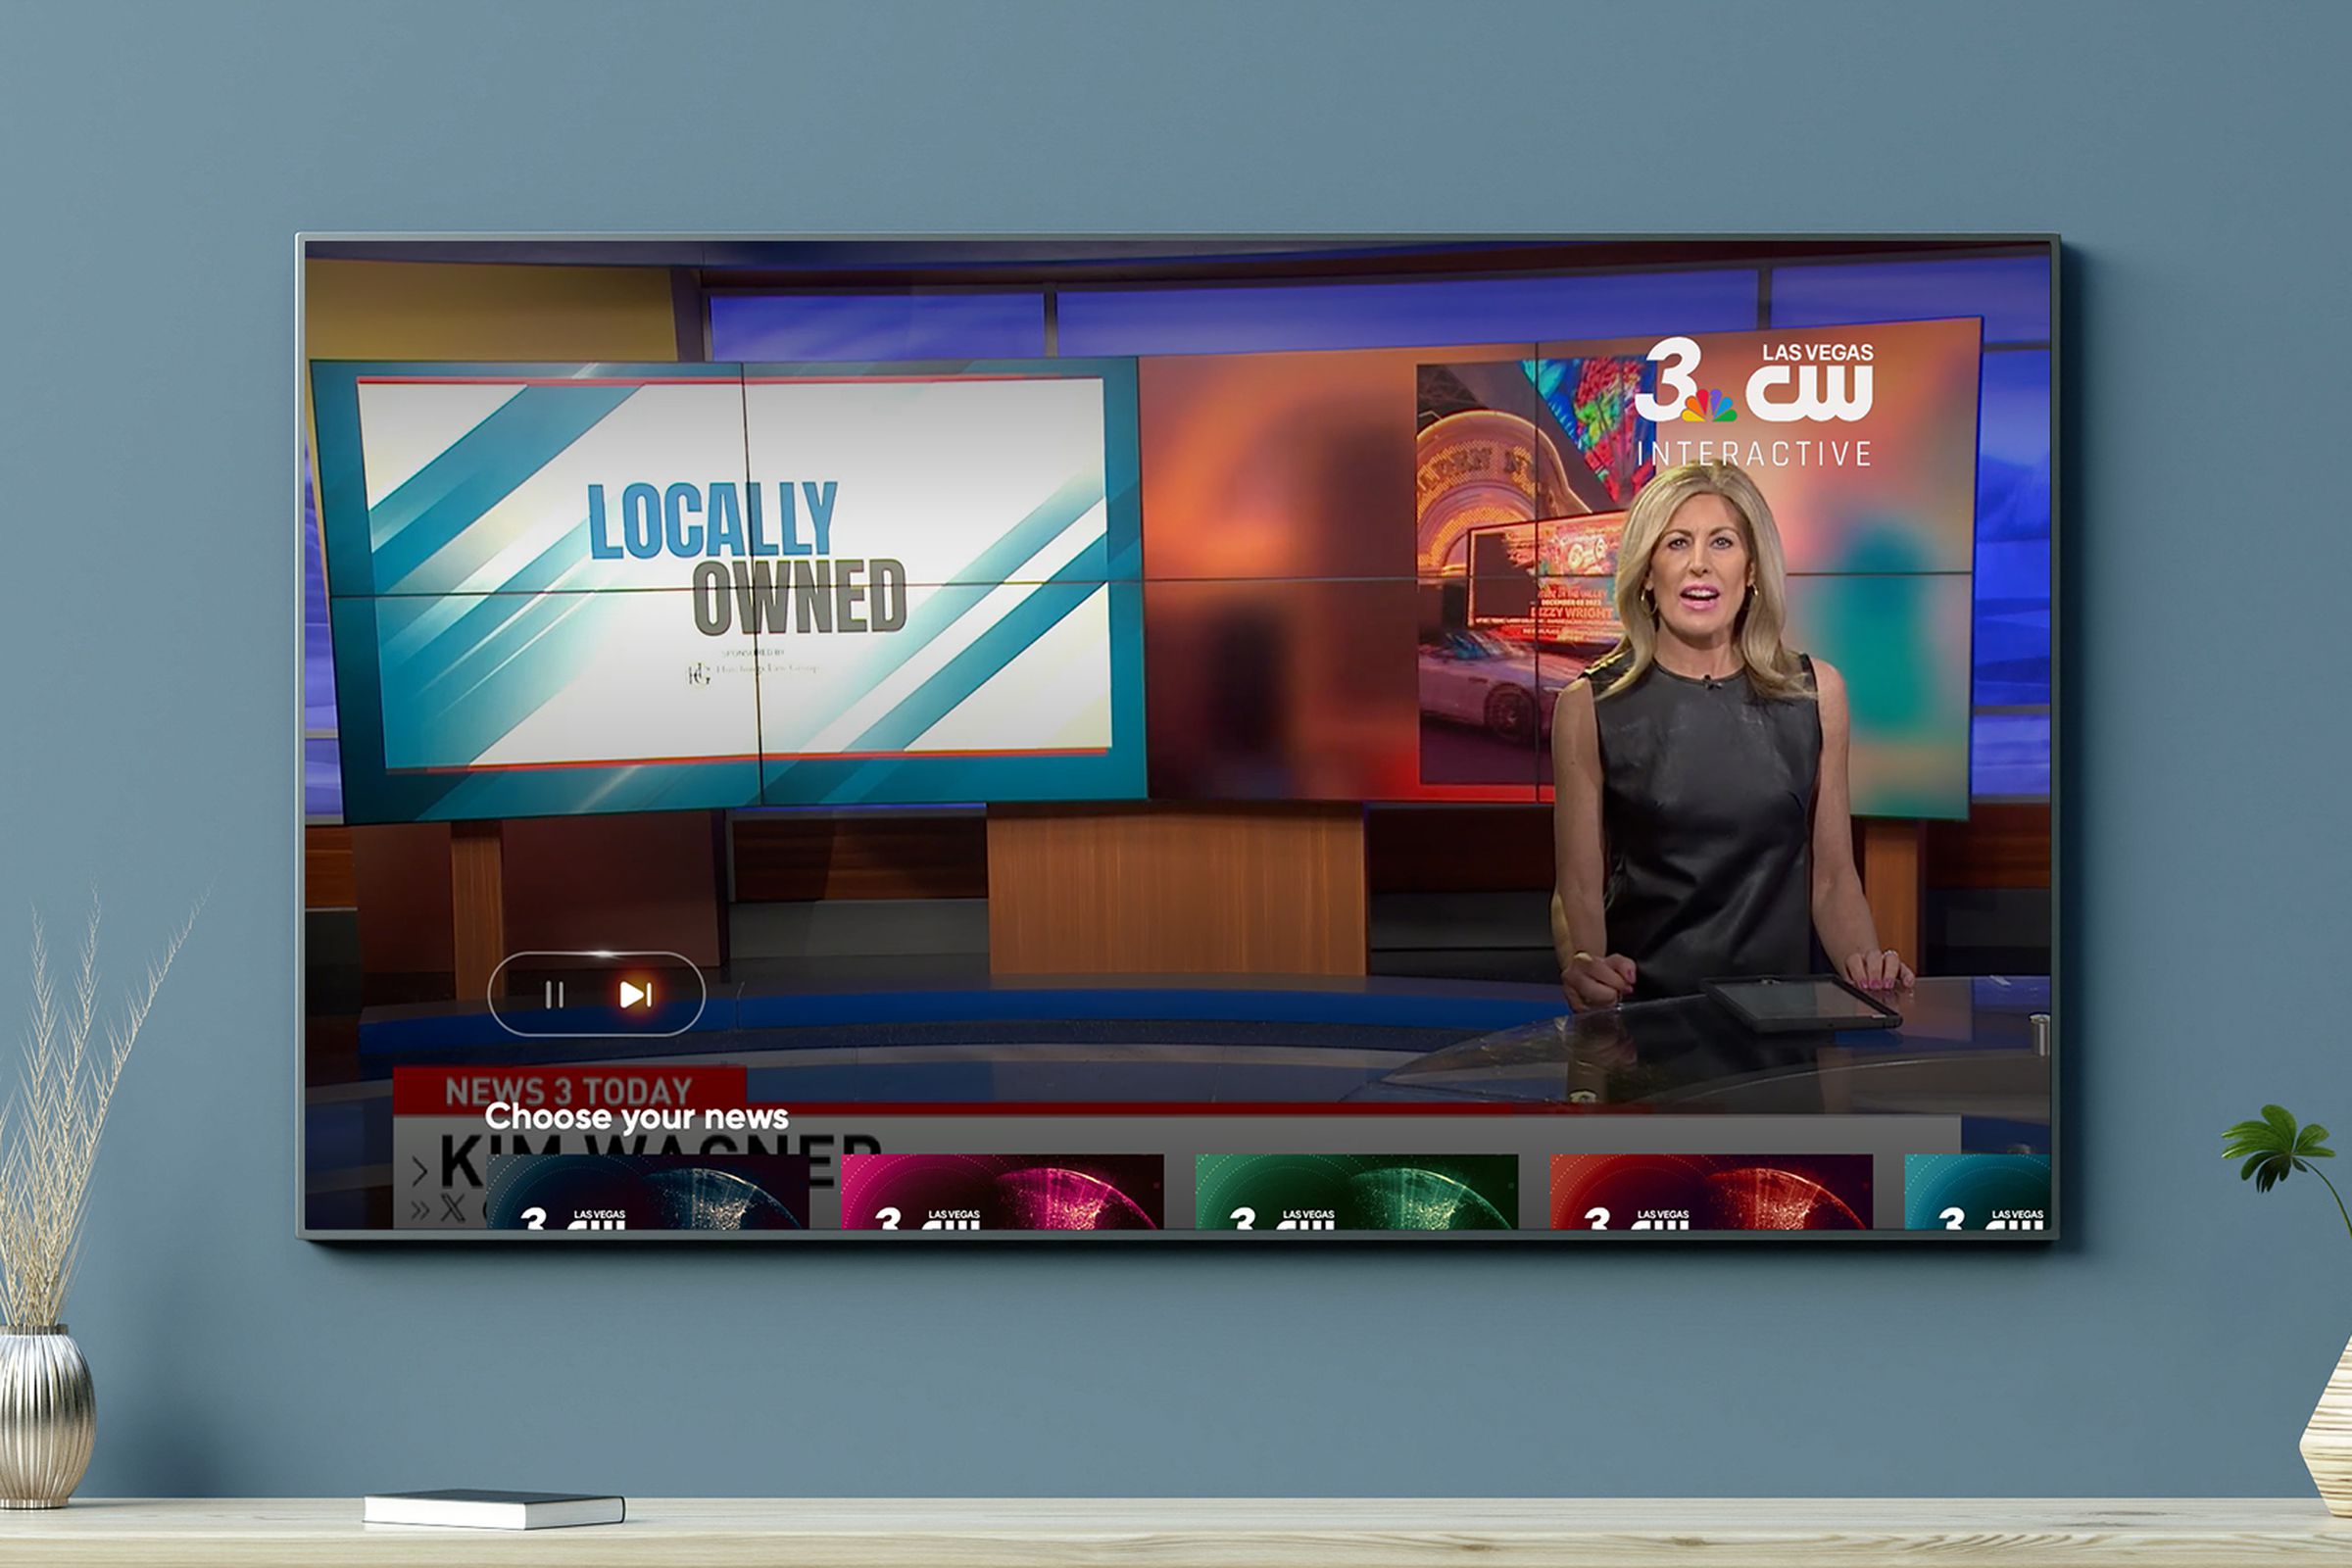 An image of a local news channel, and pause and play button are prominently displayed in the lower-left corner despite this being a broadcast station.